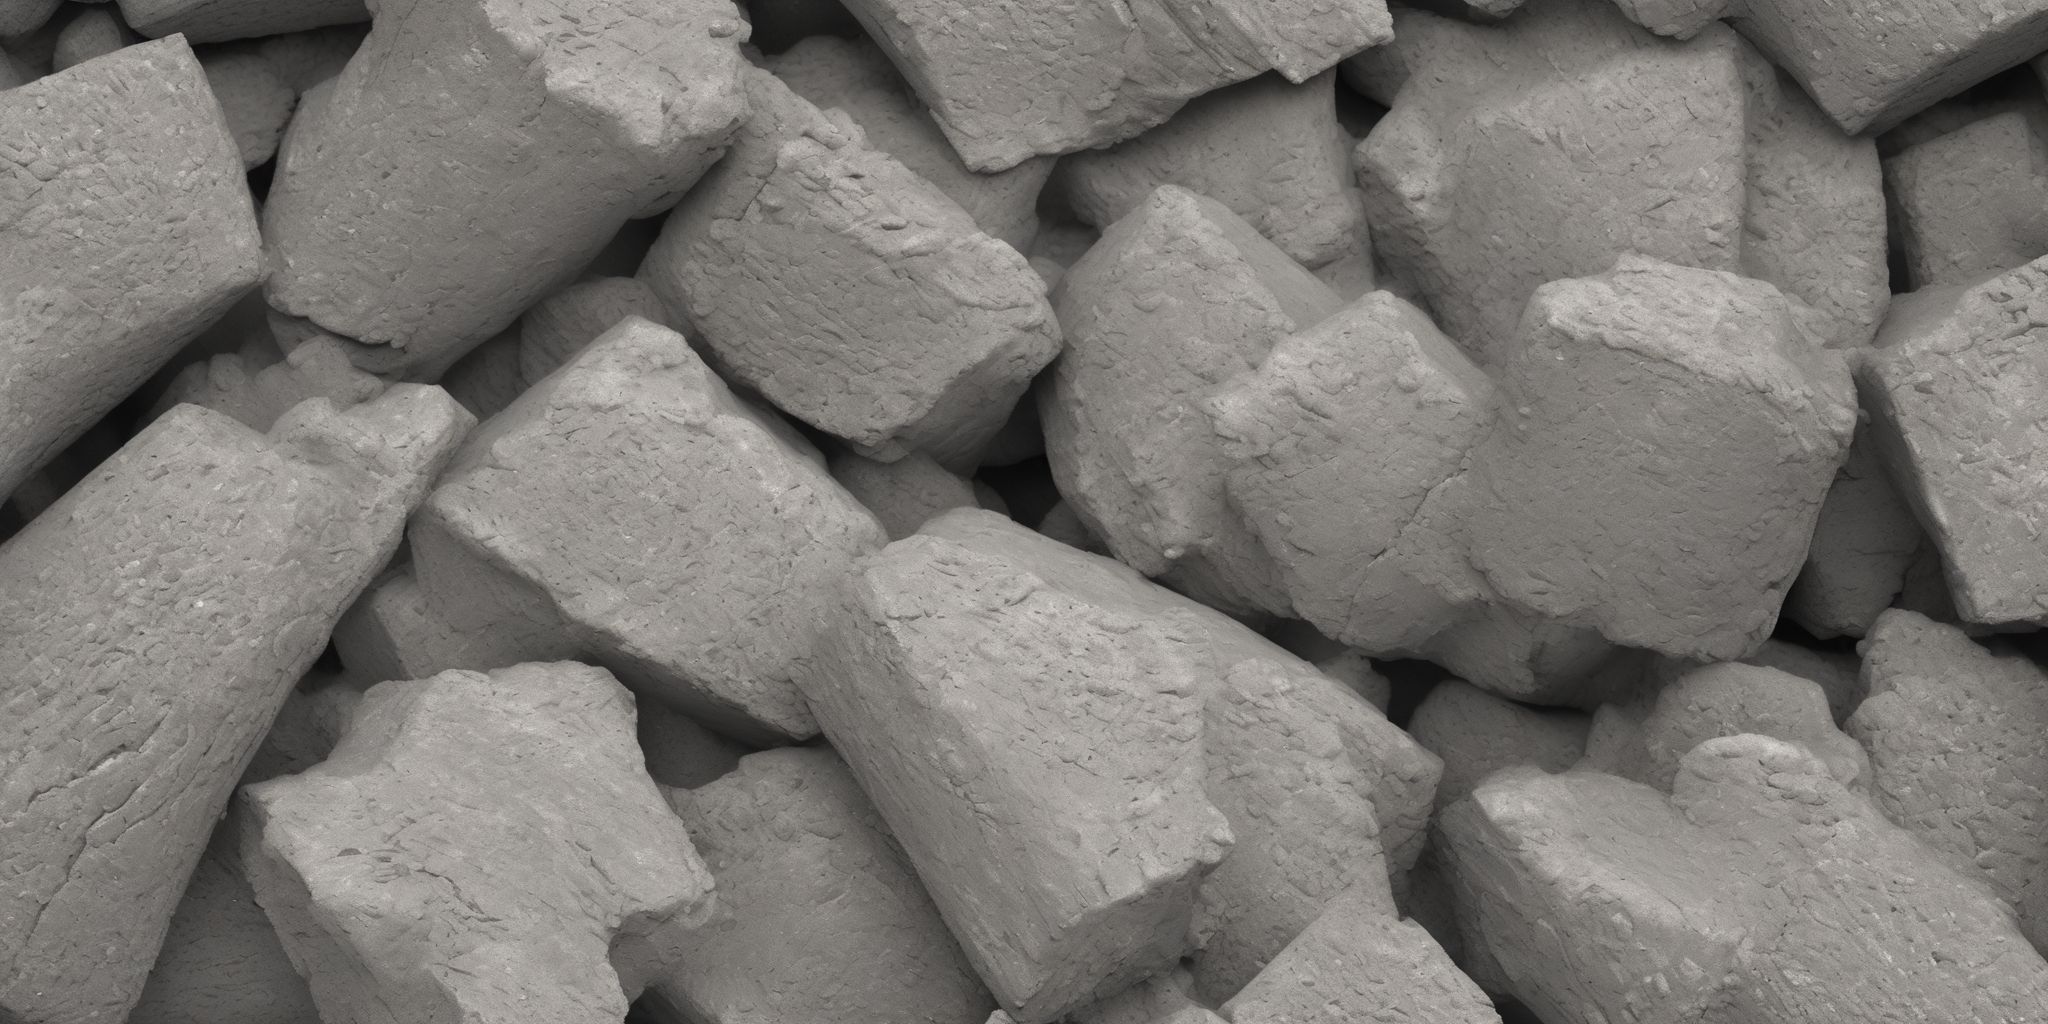 Cement  in realistic, photographic style